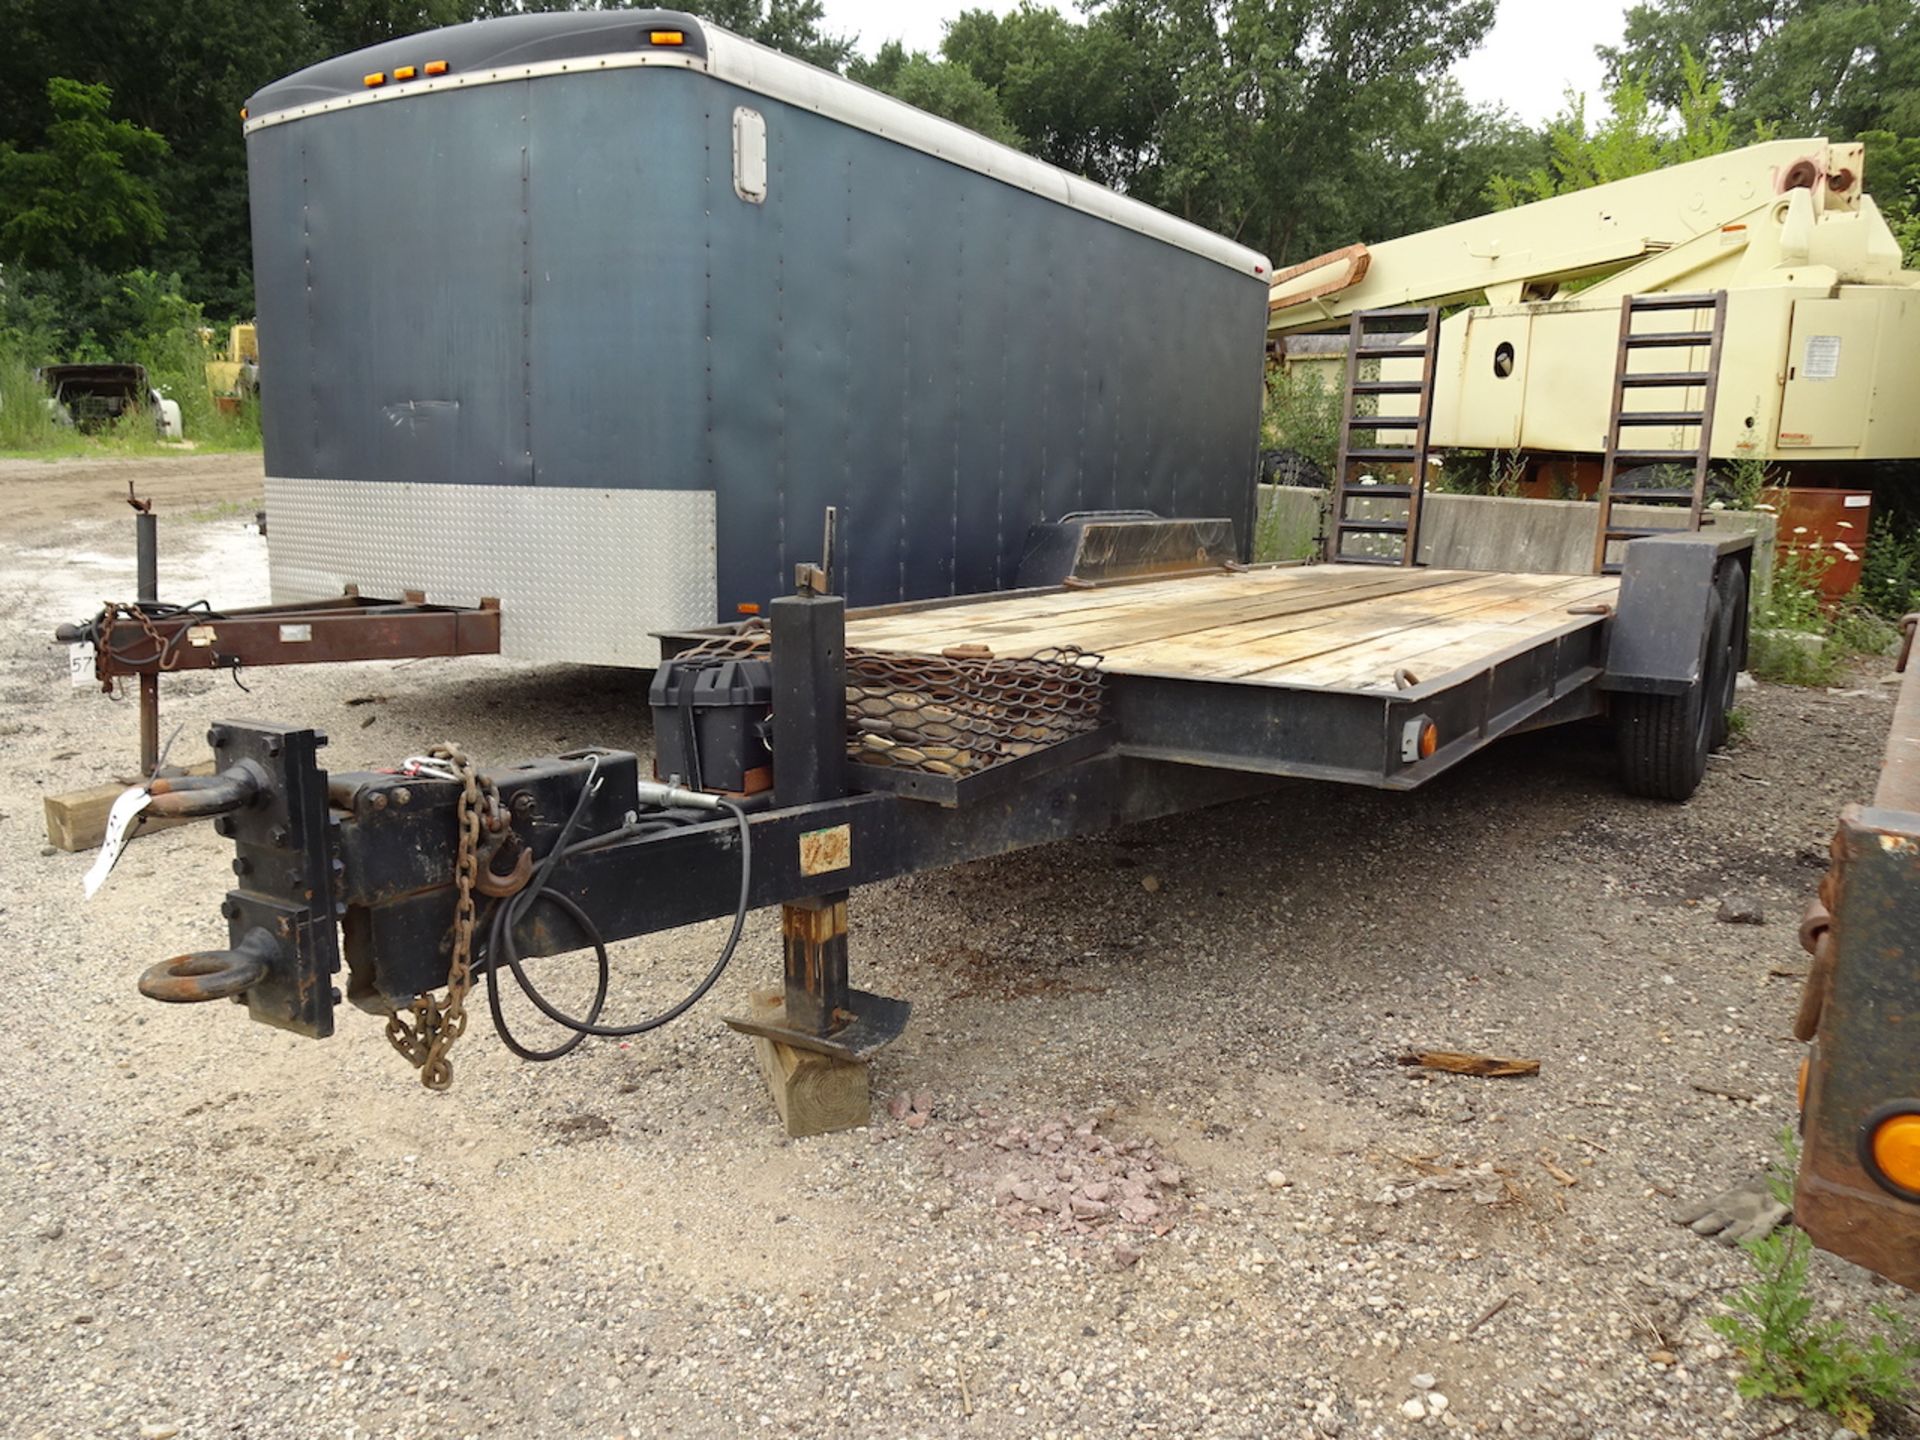 Equipment Trailer, 16 Ft. x 6 Ft. (Approx) - Image 2 of 6